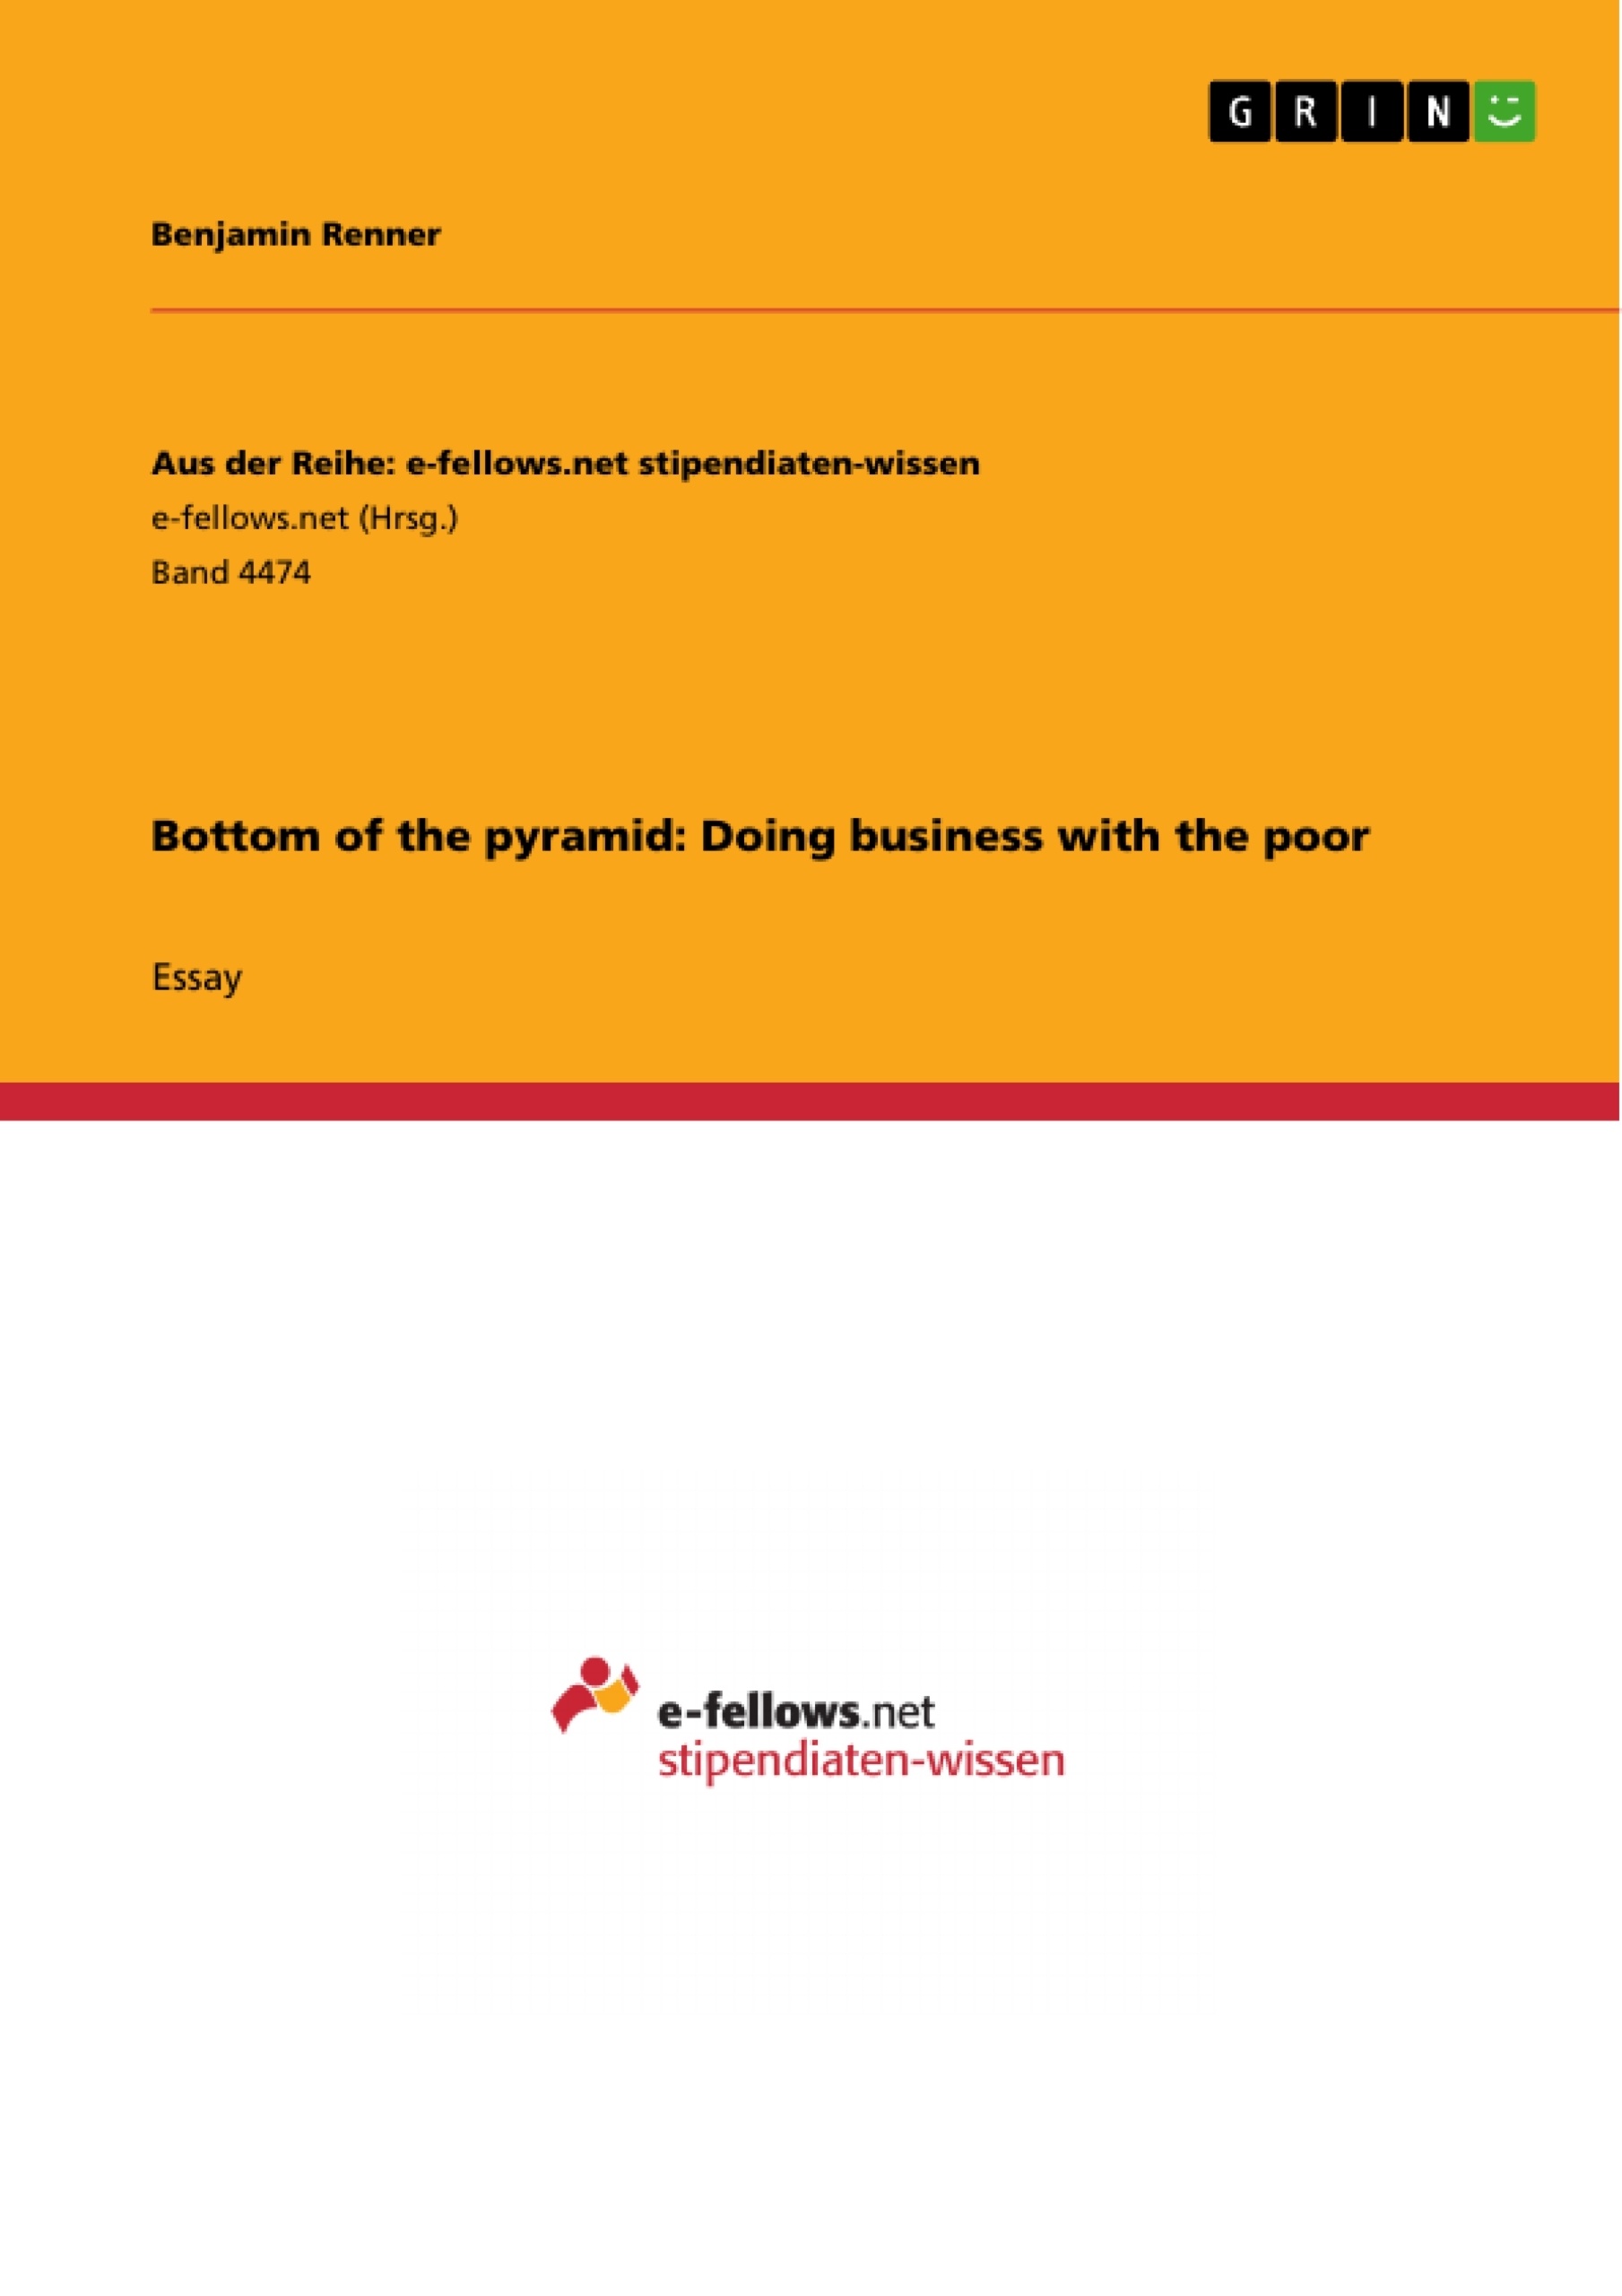 Titre: Bottom of the pyramid: Doing business with the poor